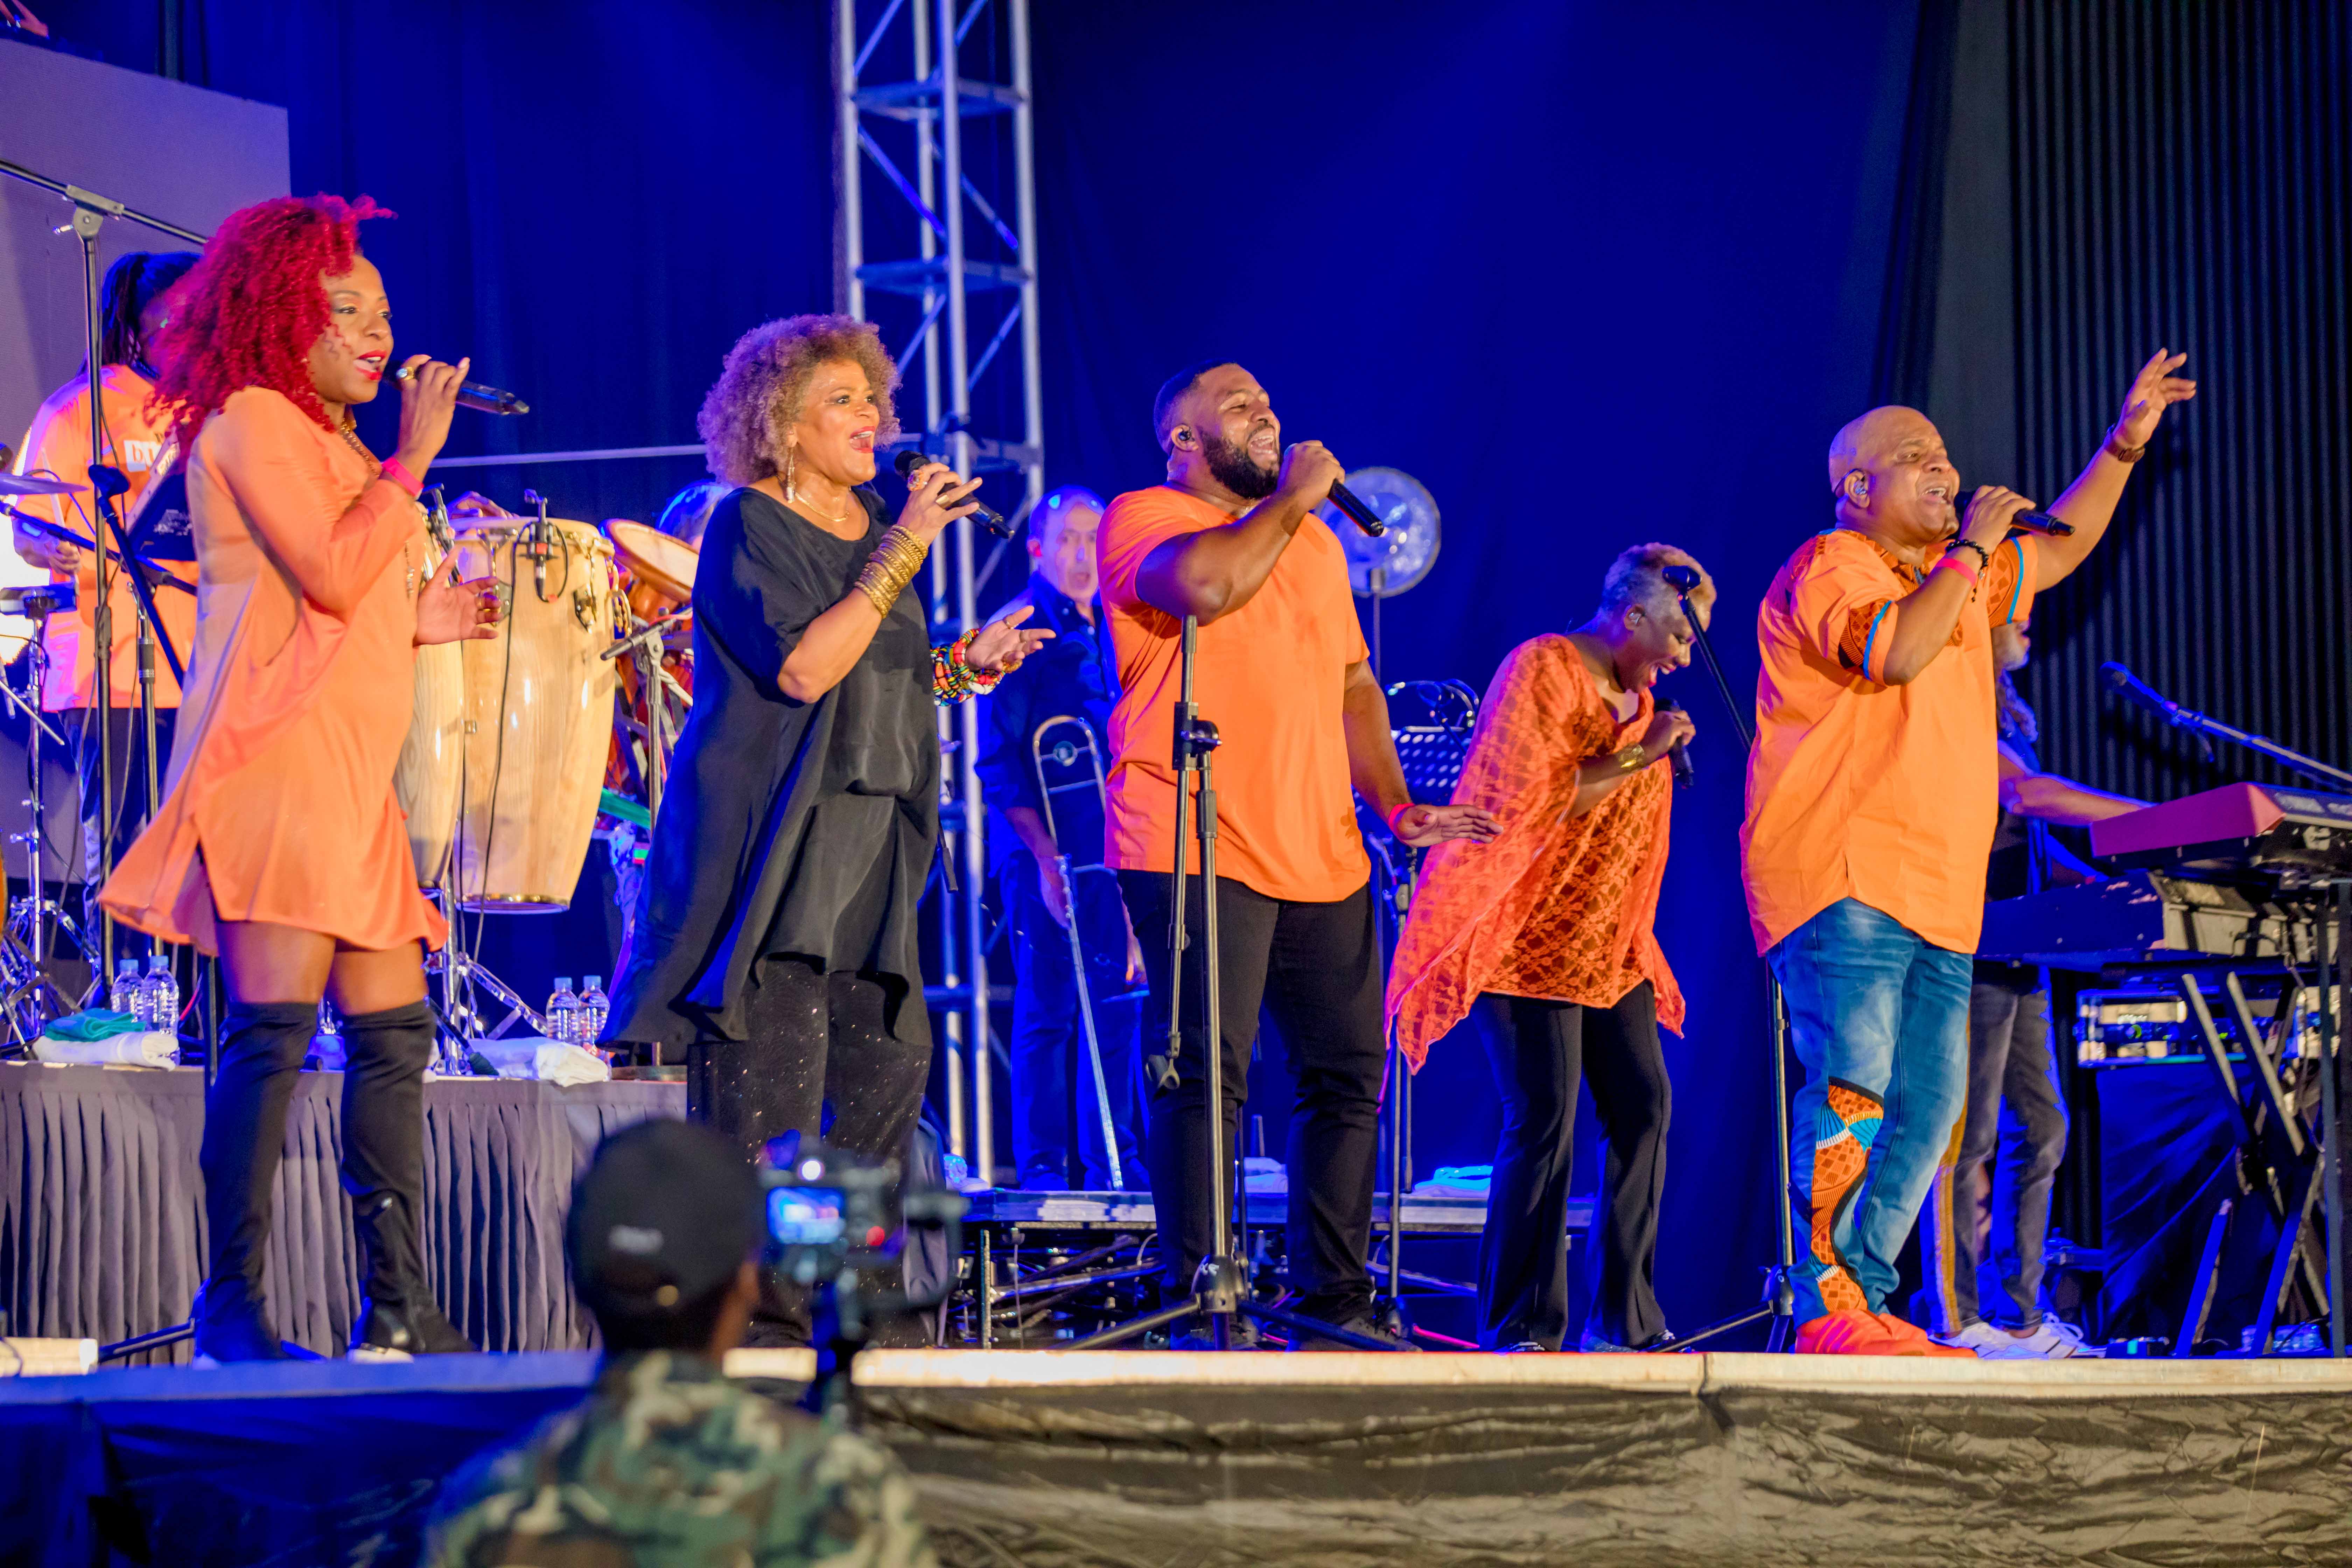 It was a love affair at the Kassav' Live on Valentine's Day.